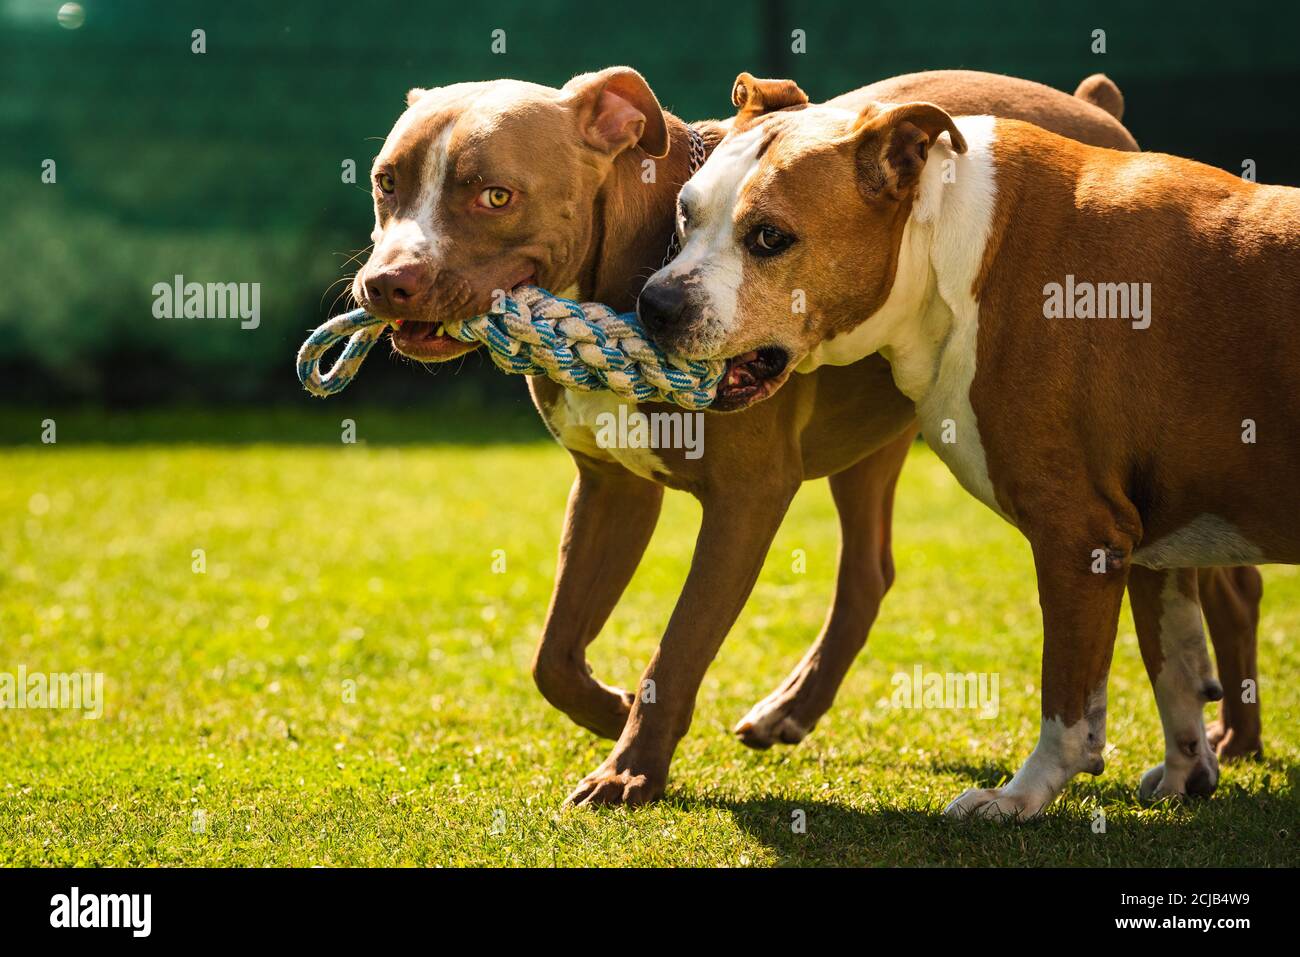 Two dogs amstaff terrier playing tog of war outside. Young and old dog fun in backyard. Stock Photo